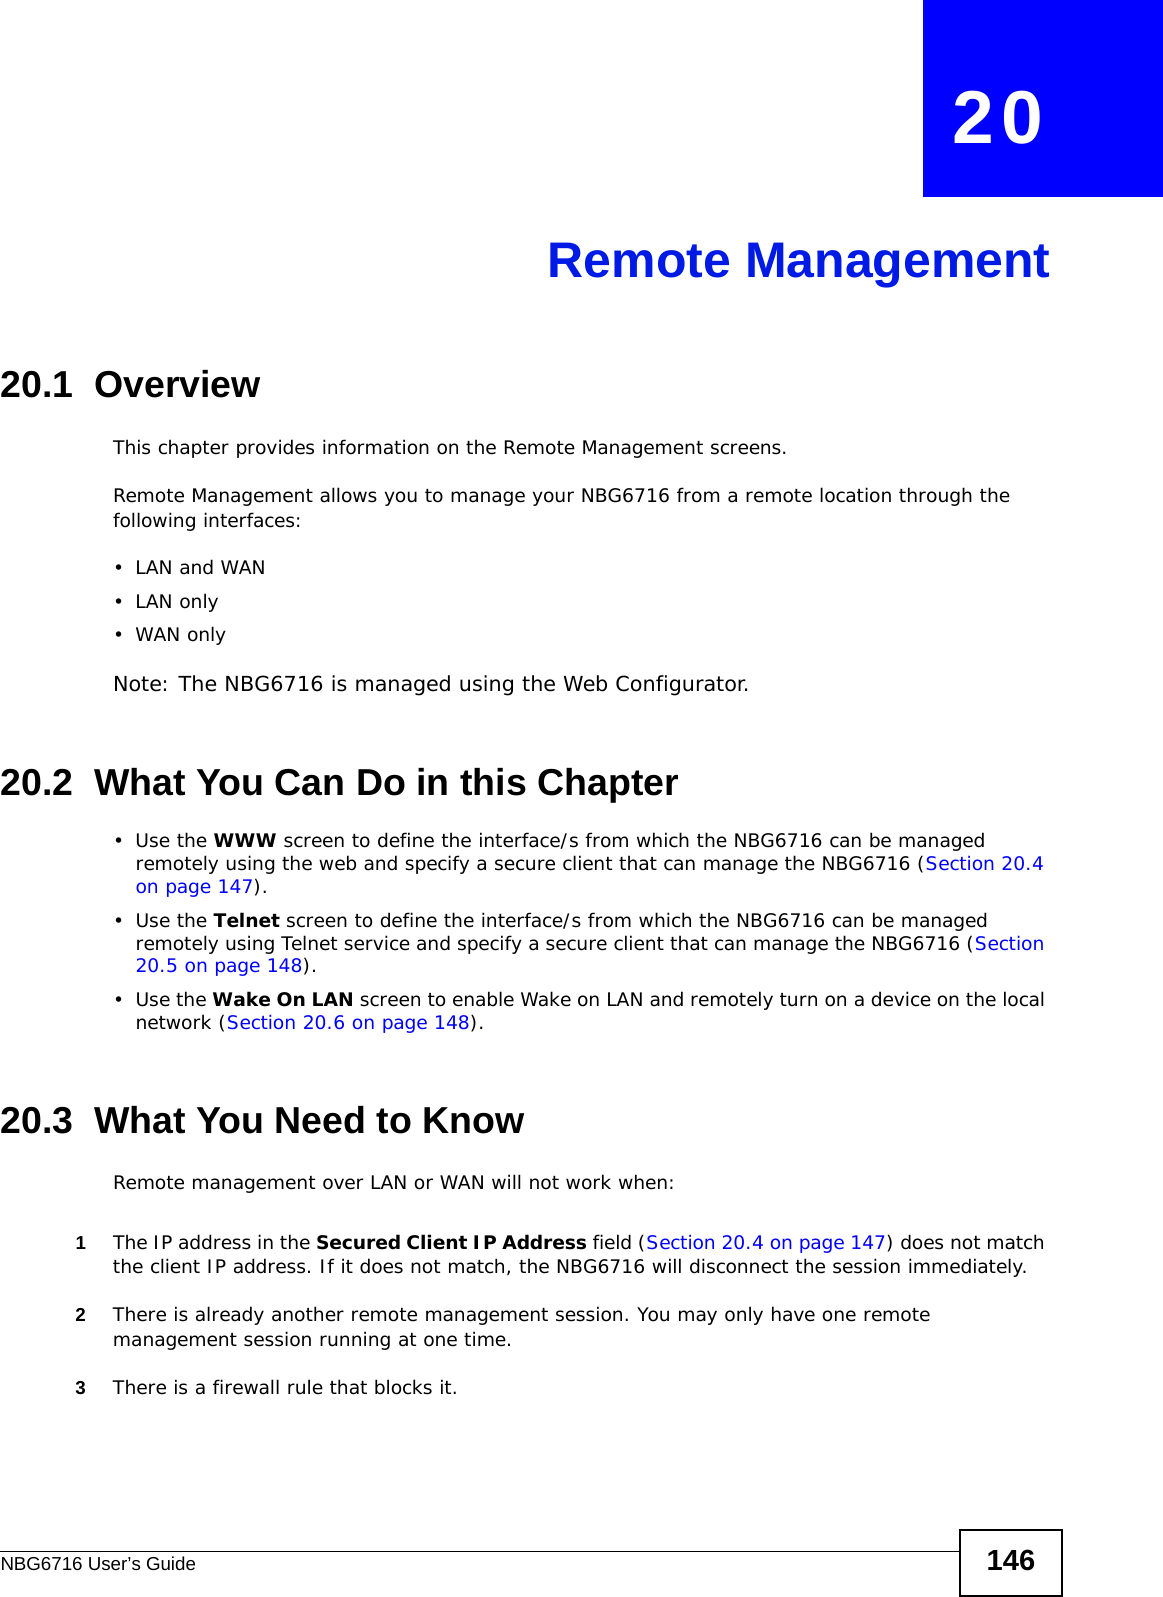 NBG6716 User’s Guide 146CHAPTER   20Remote Management20.1  OverviewThis chapter provides information on the Remote Management screens. Remote Management allows you to manage your NBG6716 from a remote location through the following interfaces:•LAN and WAN•LAN only•WAN onlyNote: The NBG6716 is managed using the Web Configurator.20.2  What You Can Do in this Chapter•Use the WWW screen to define the interface/s from which the NBG6716 can be managed remotely using the web and specify a secure client that can manage the NBG6716 (Section 20.4 on page 147).•Use the Telnet screen to define the interface/s from which the NBG6716 can be managed remotely using Telnet service and specify a secure client that can manage the NBG6716 (Section 20.5 on page 148).•Use the Wake On LAN screen to enable Wake on LAN and remotely turn on a device on the local network (Section 20.6 on page 148).20.3  What You Need to KnowRemote management over LAN or WAN will not work when:1The IP address in the Secured Client IP Address field (Section 20.4 on page 147) does not match the client IP address. If it does not match, the NBG6716 will disconnect the session immediately.2There is already another remote management session. You may only have one remote management session running at one time.3There is a firewall rule that blocks it.